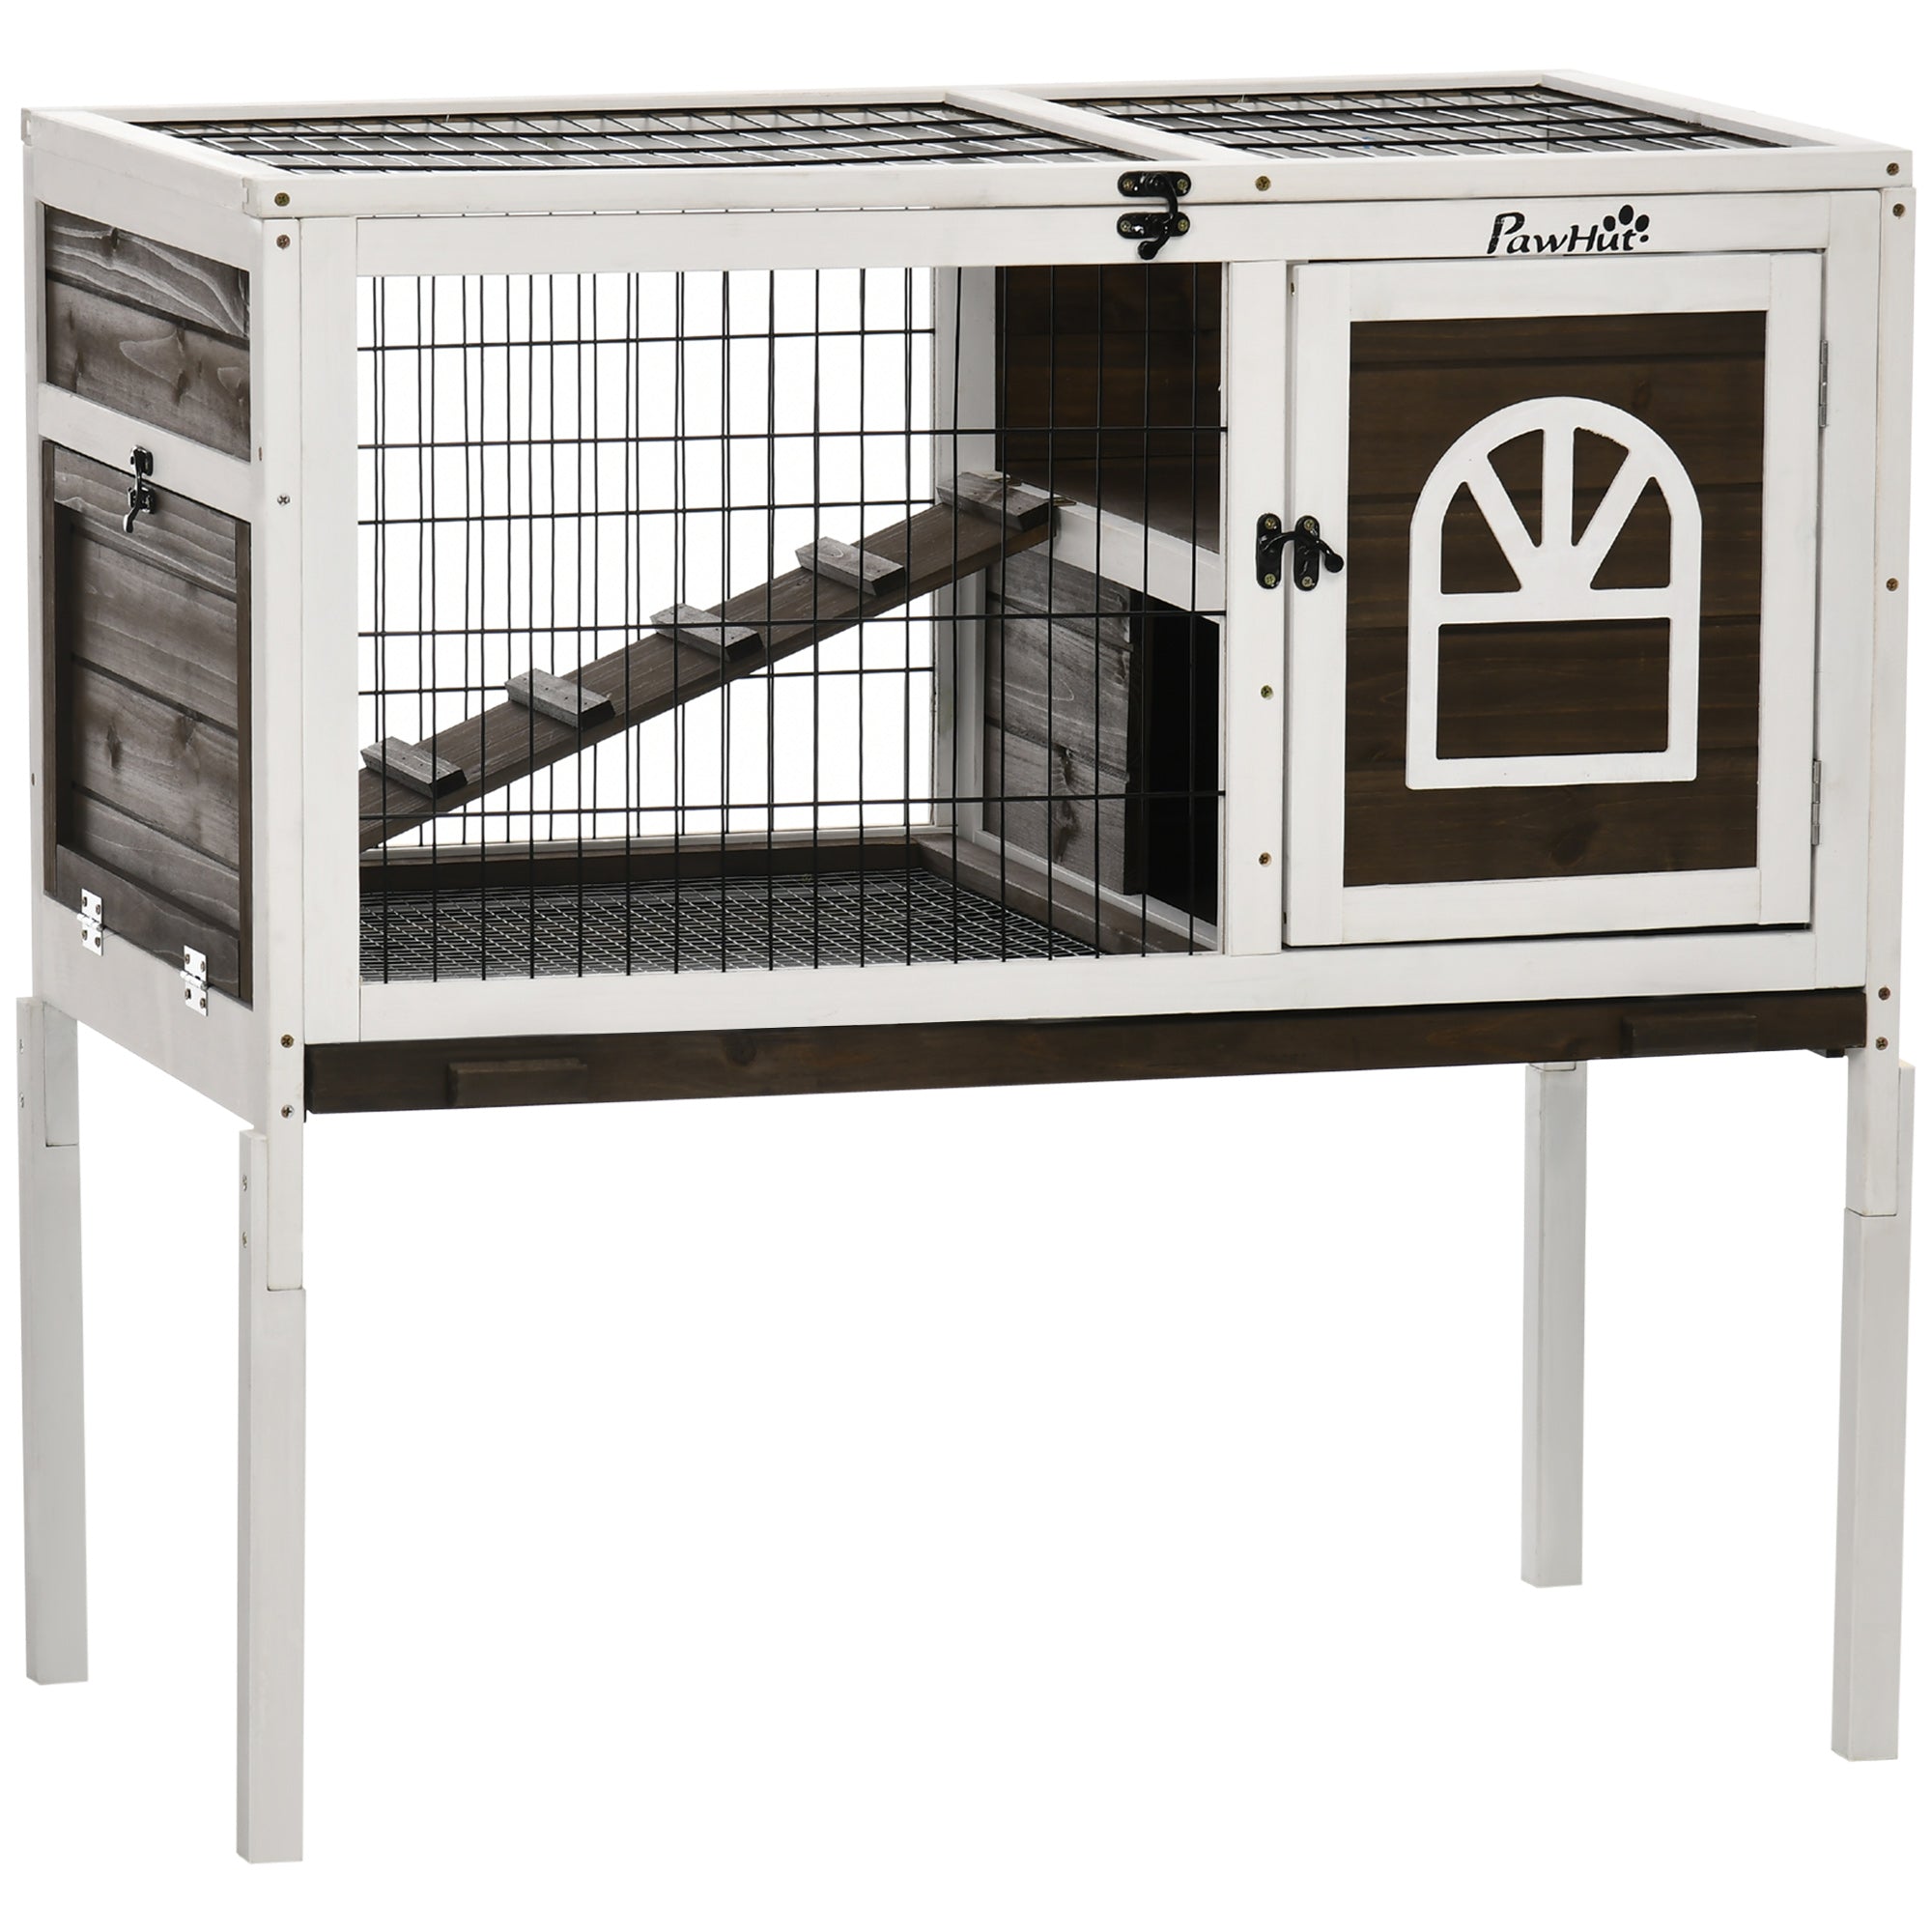 Wooden Rabbit Hutch with Openable Roof, Elevated Guinea Pig Cage with Ladder, Small Animal House for Indoor Use with Slide-out Tray, 90 x 53 x 87cm, Coffee Brown, PawHut,